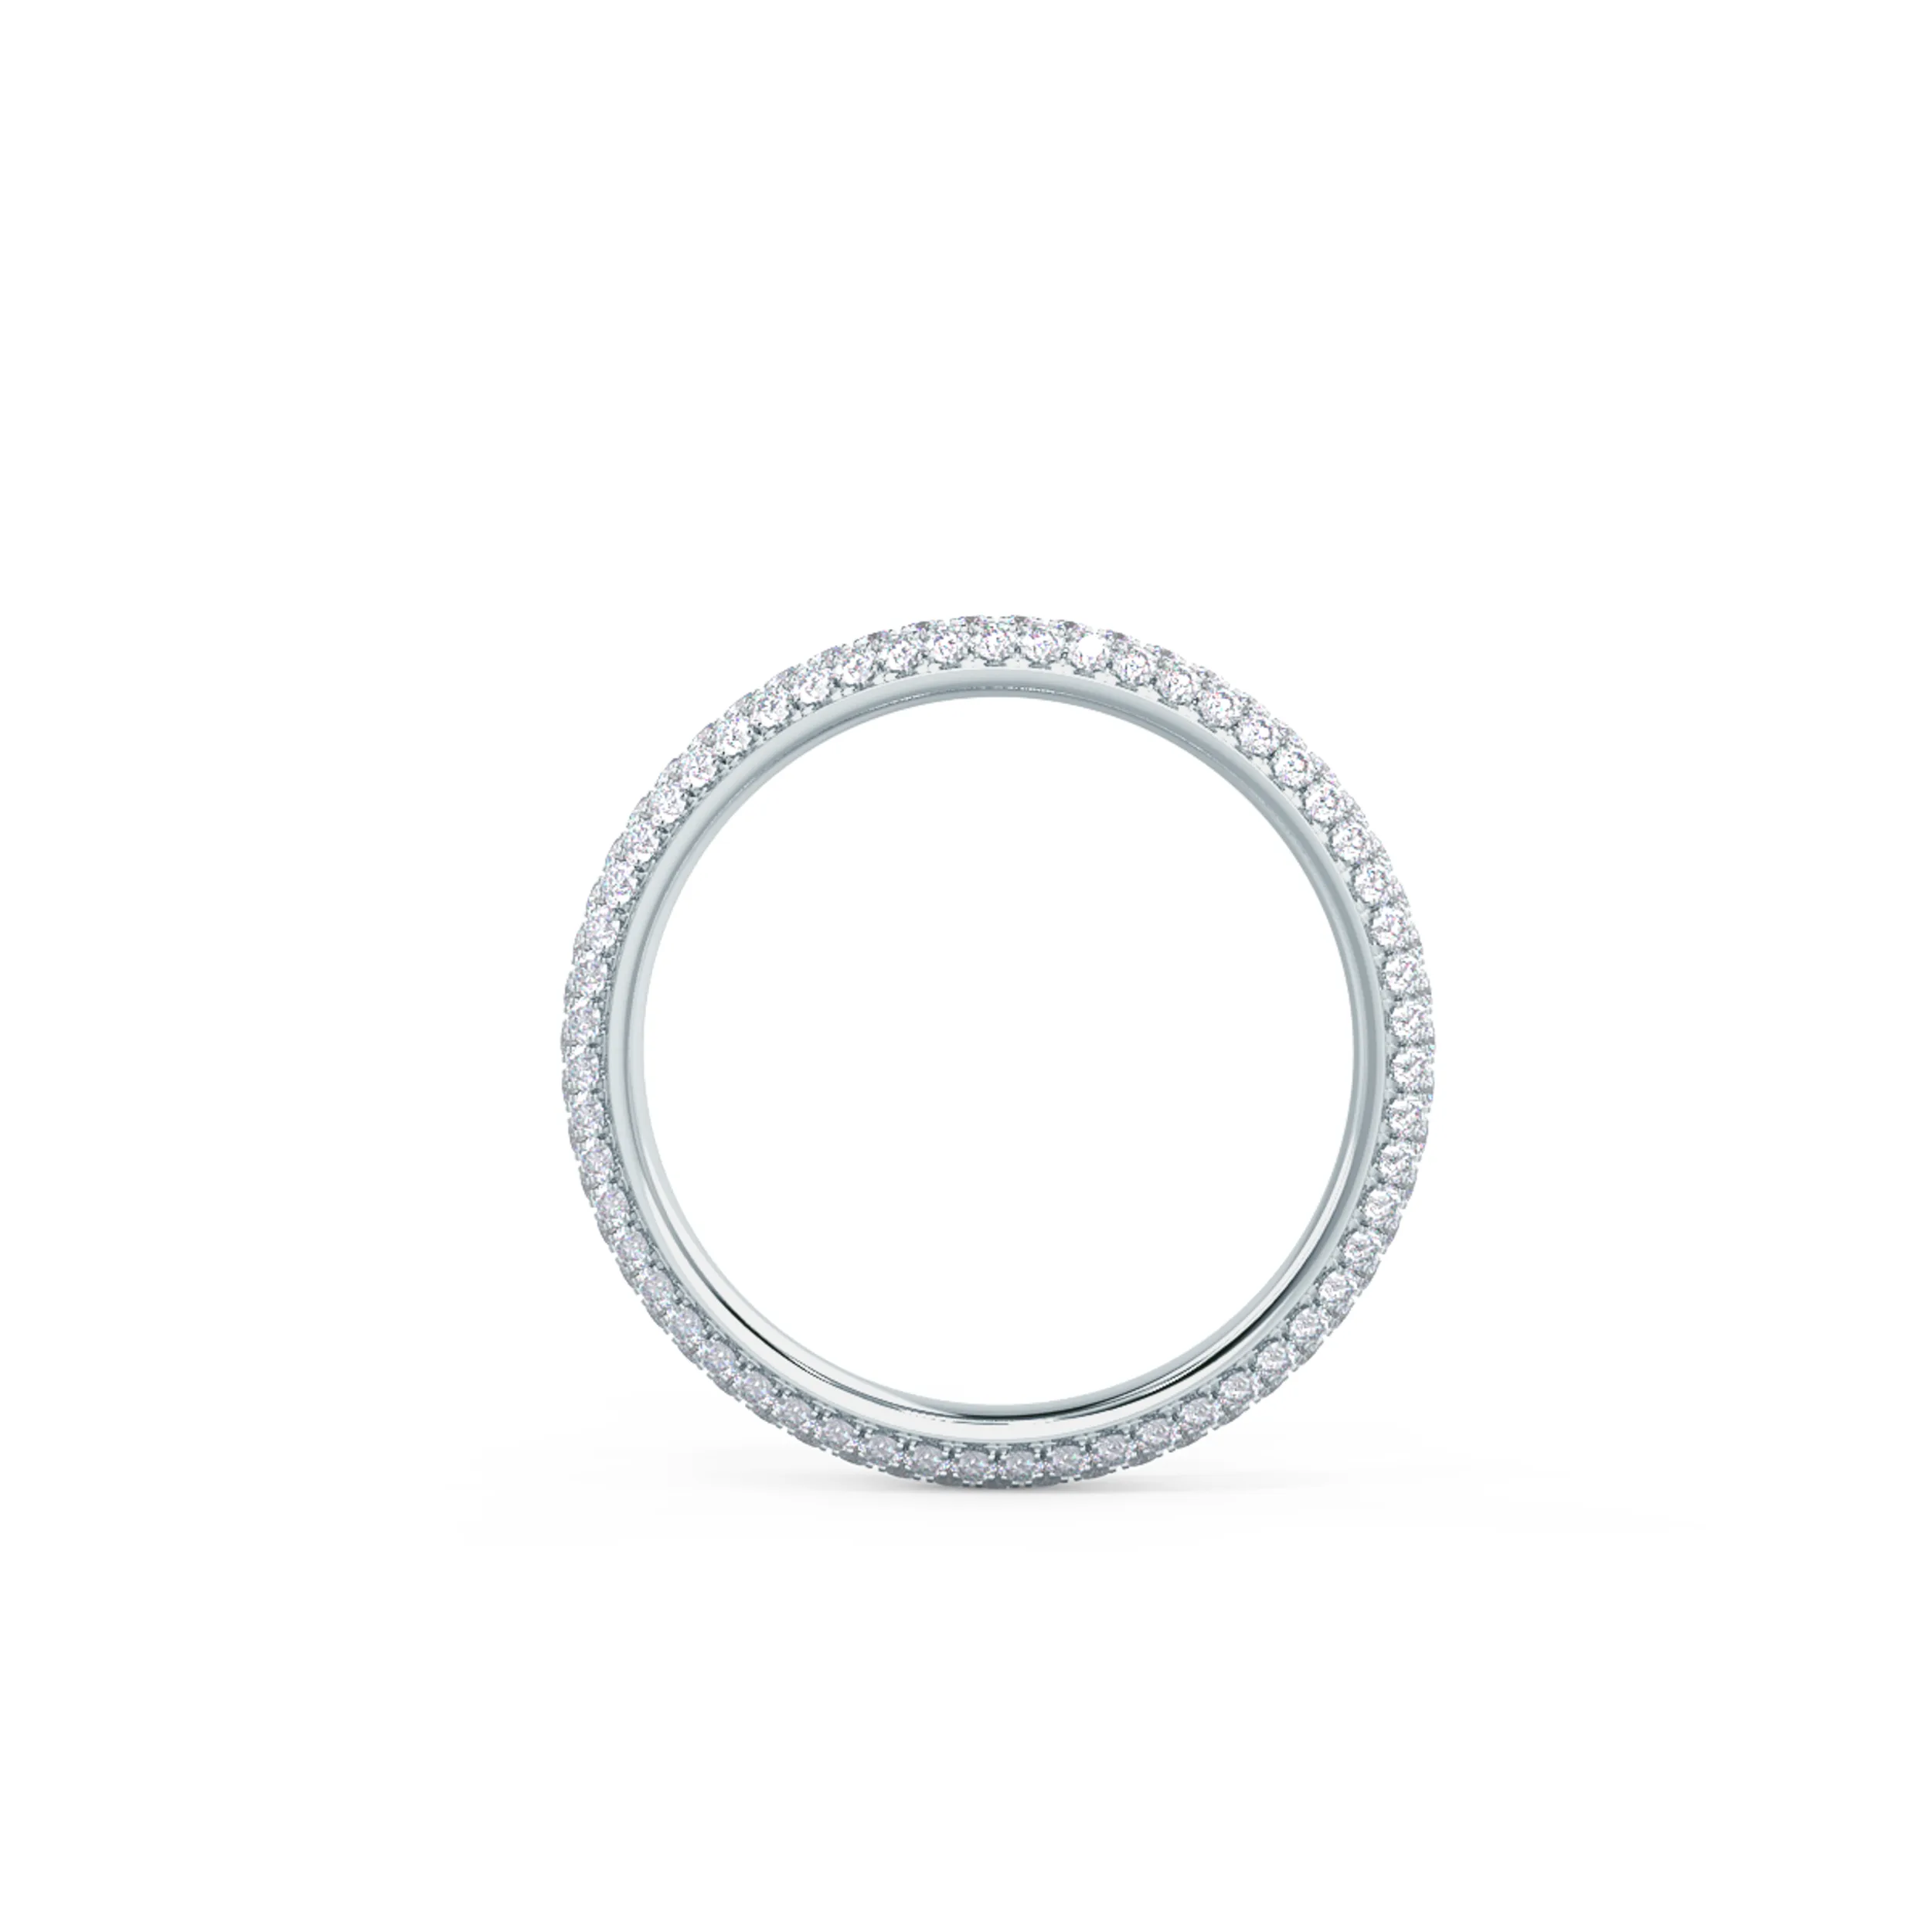 18k White Gold Three Sided Pavé Eternity Band featuring 0.8 ct Round Diamonds (Profile View)